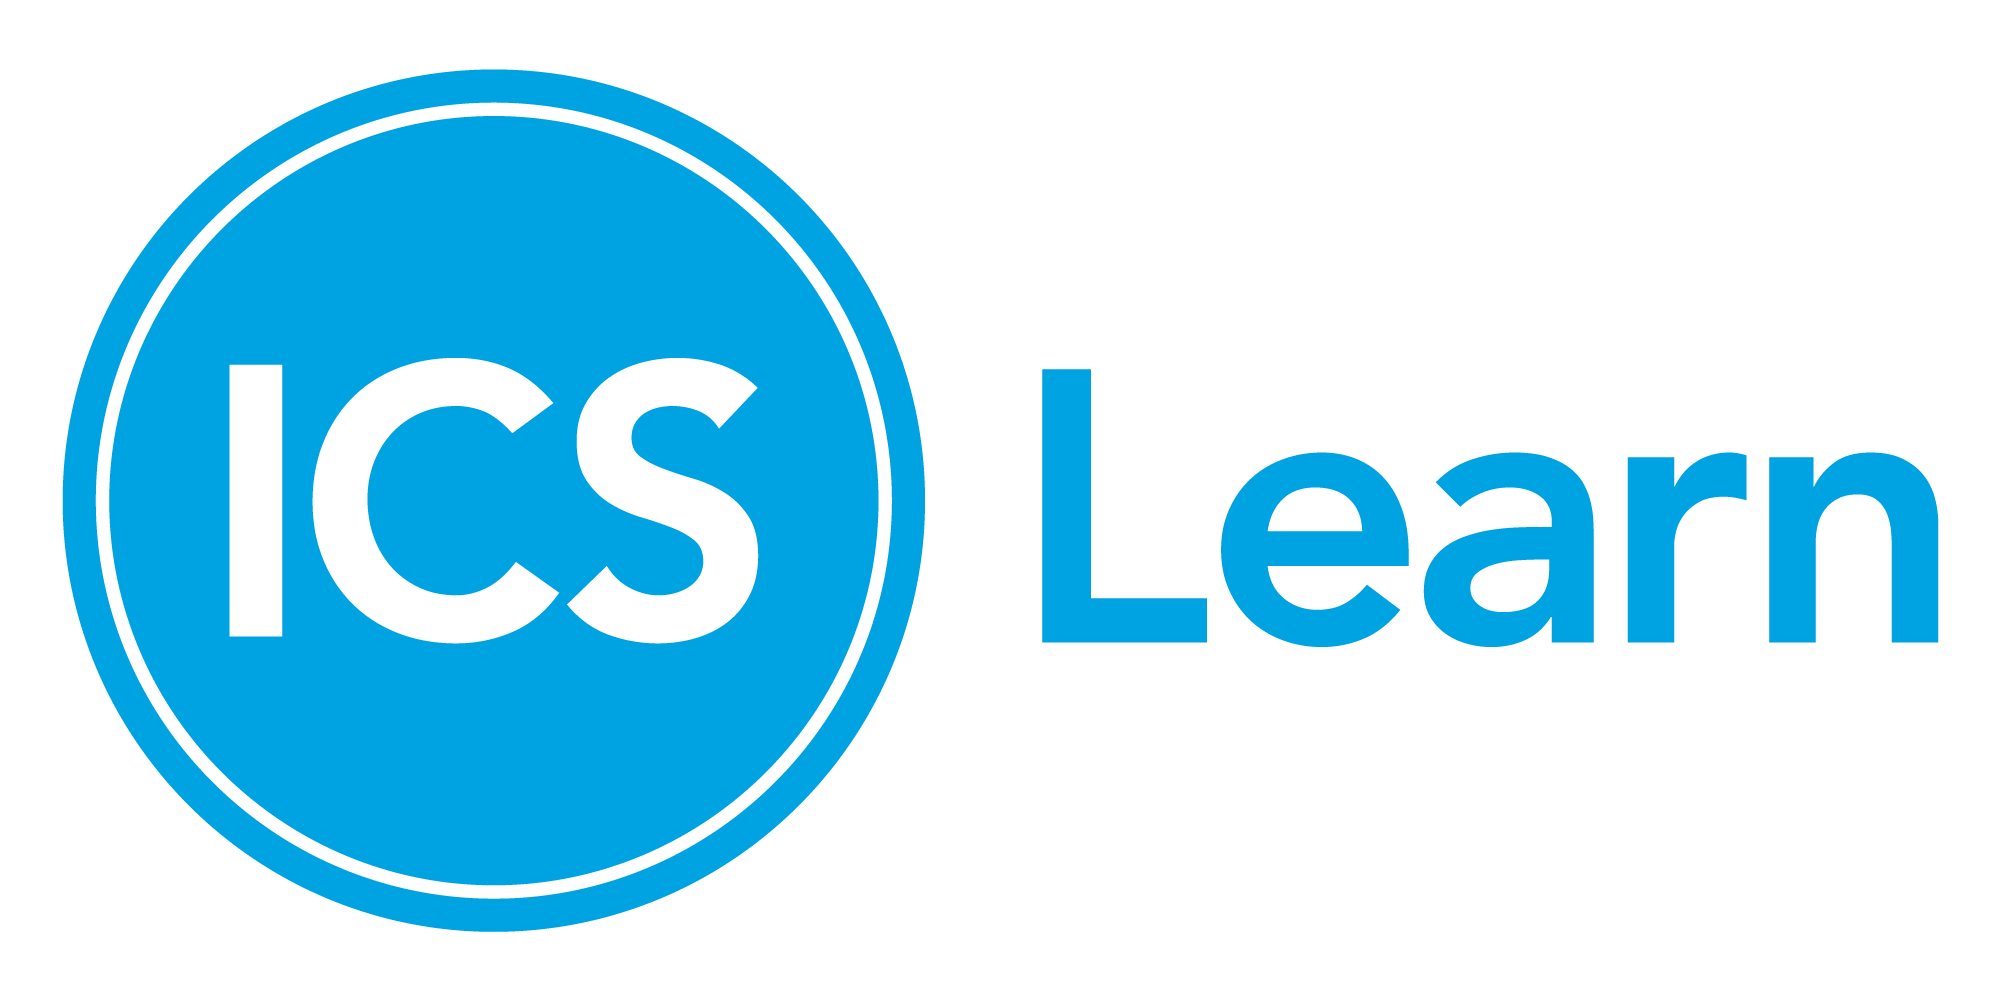 More about ICS Learn